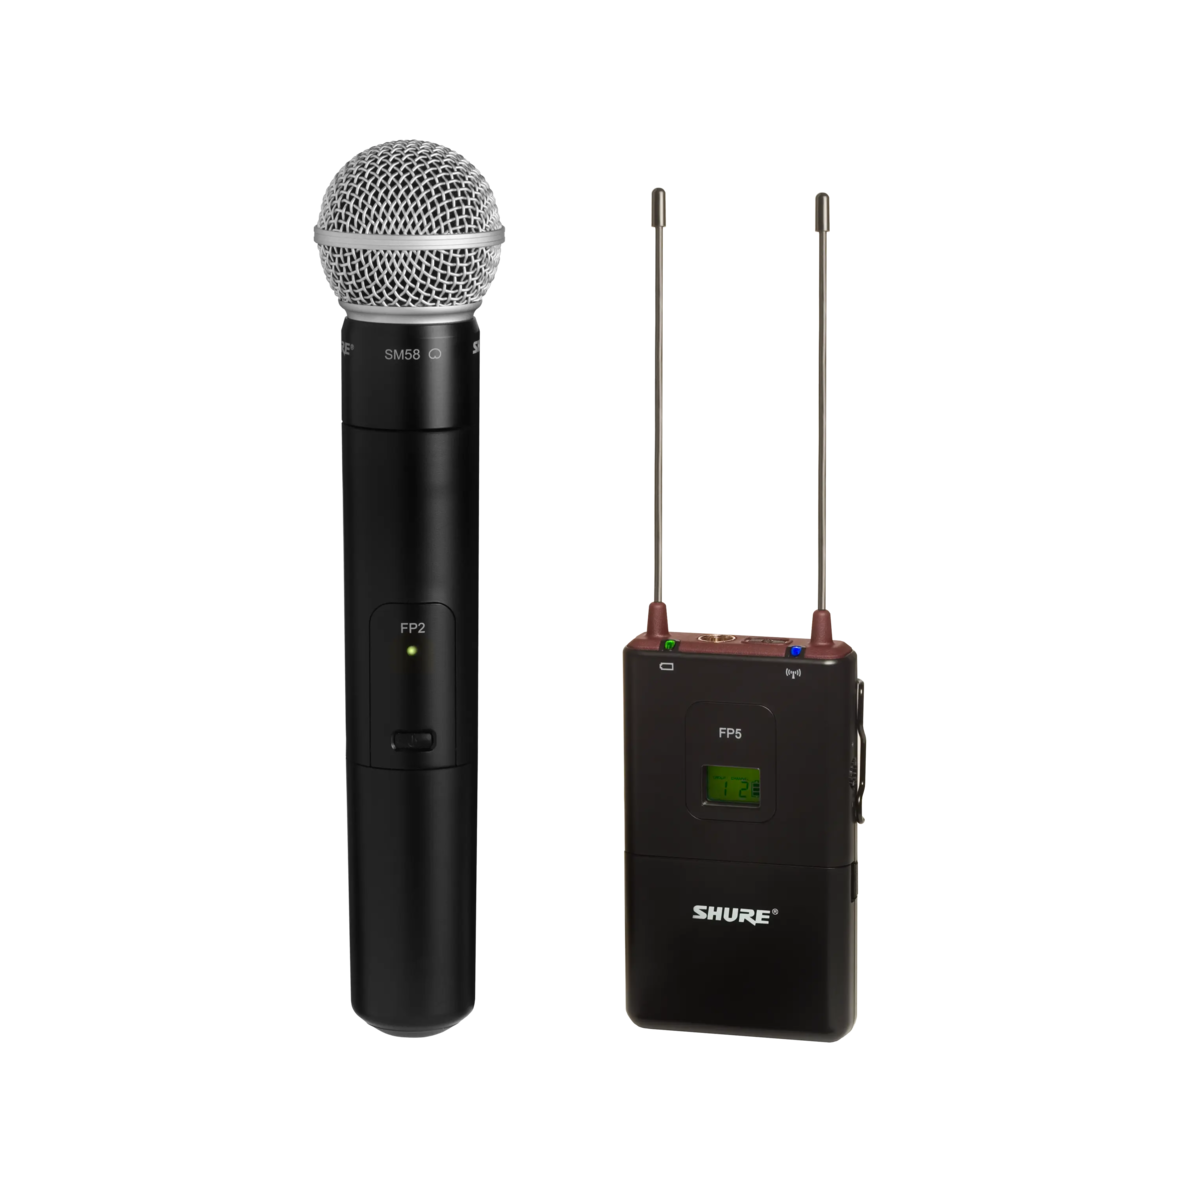 https://products.shureweb.eu/shure_product_db/product_images/files/925/fde/51-/header_transparent/321a3bf9aea82af430304cacbccd8833.png